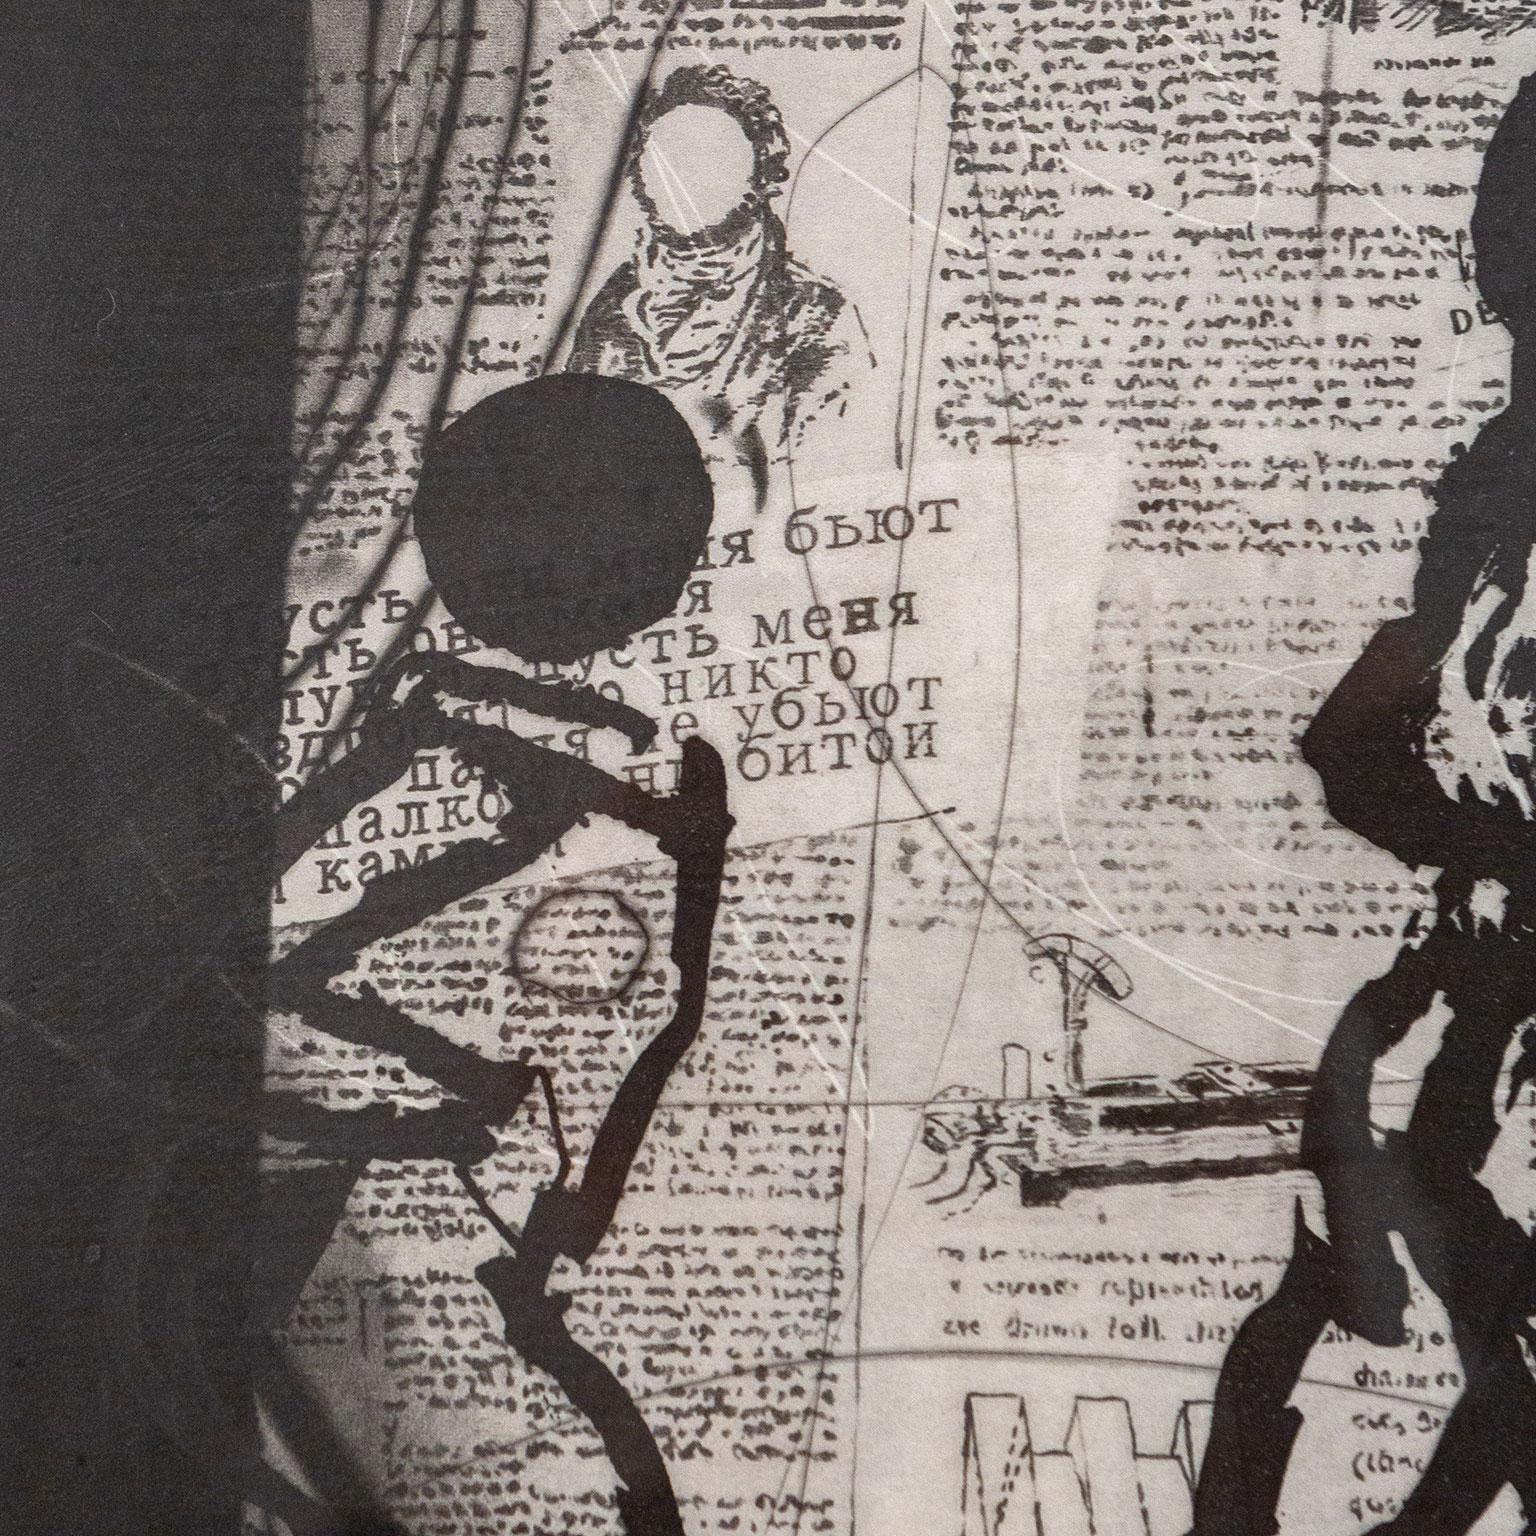 The Nose - Contemporary Print by William Kentridge